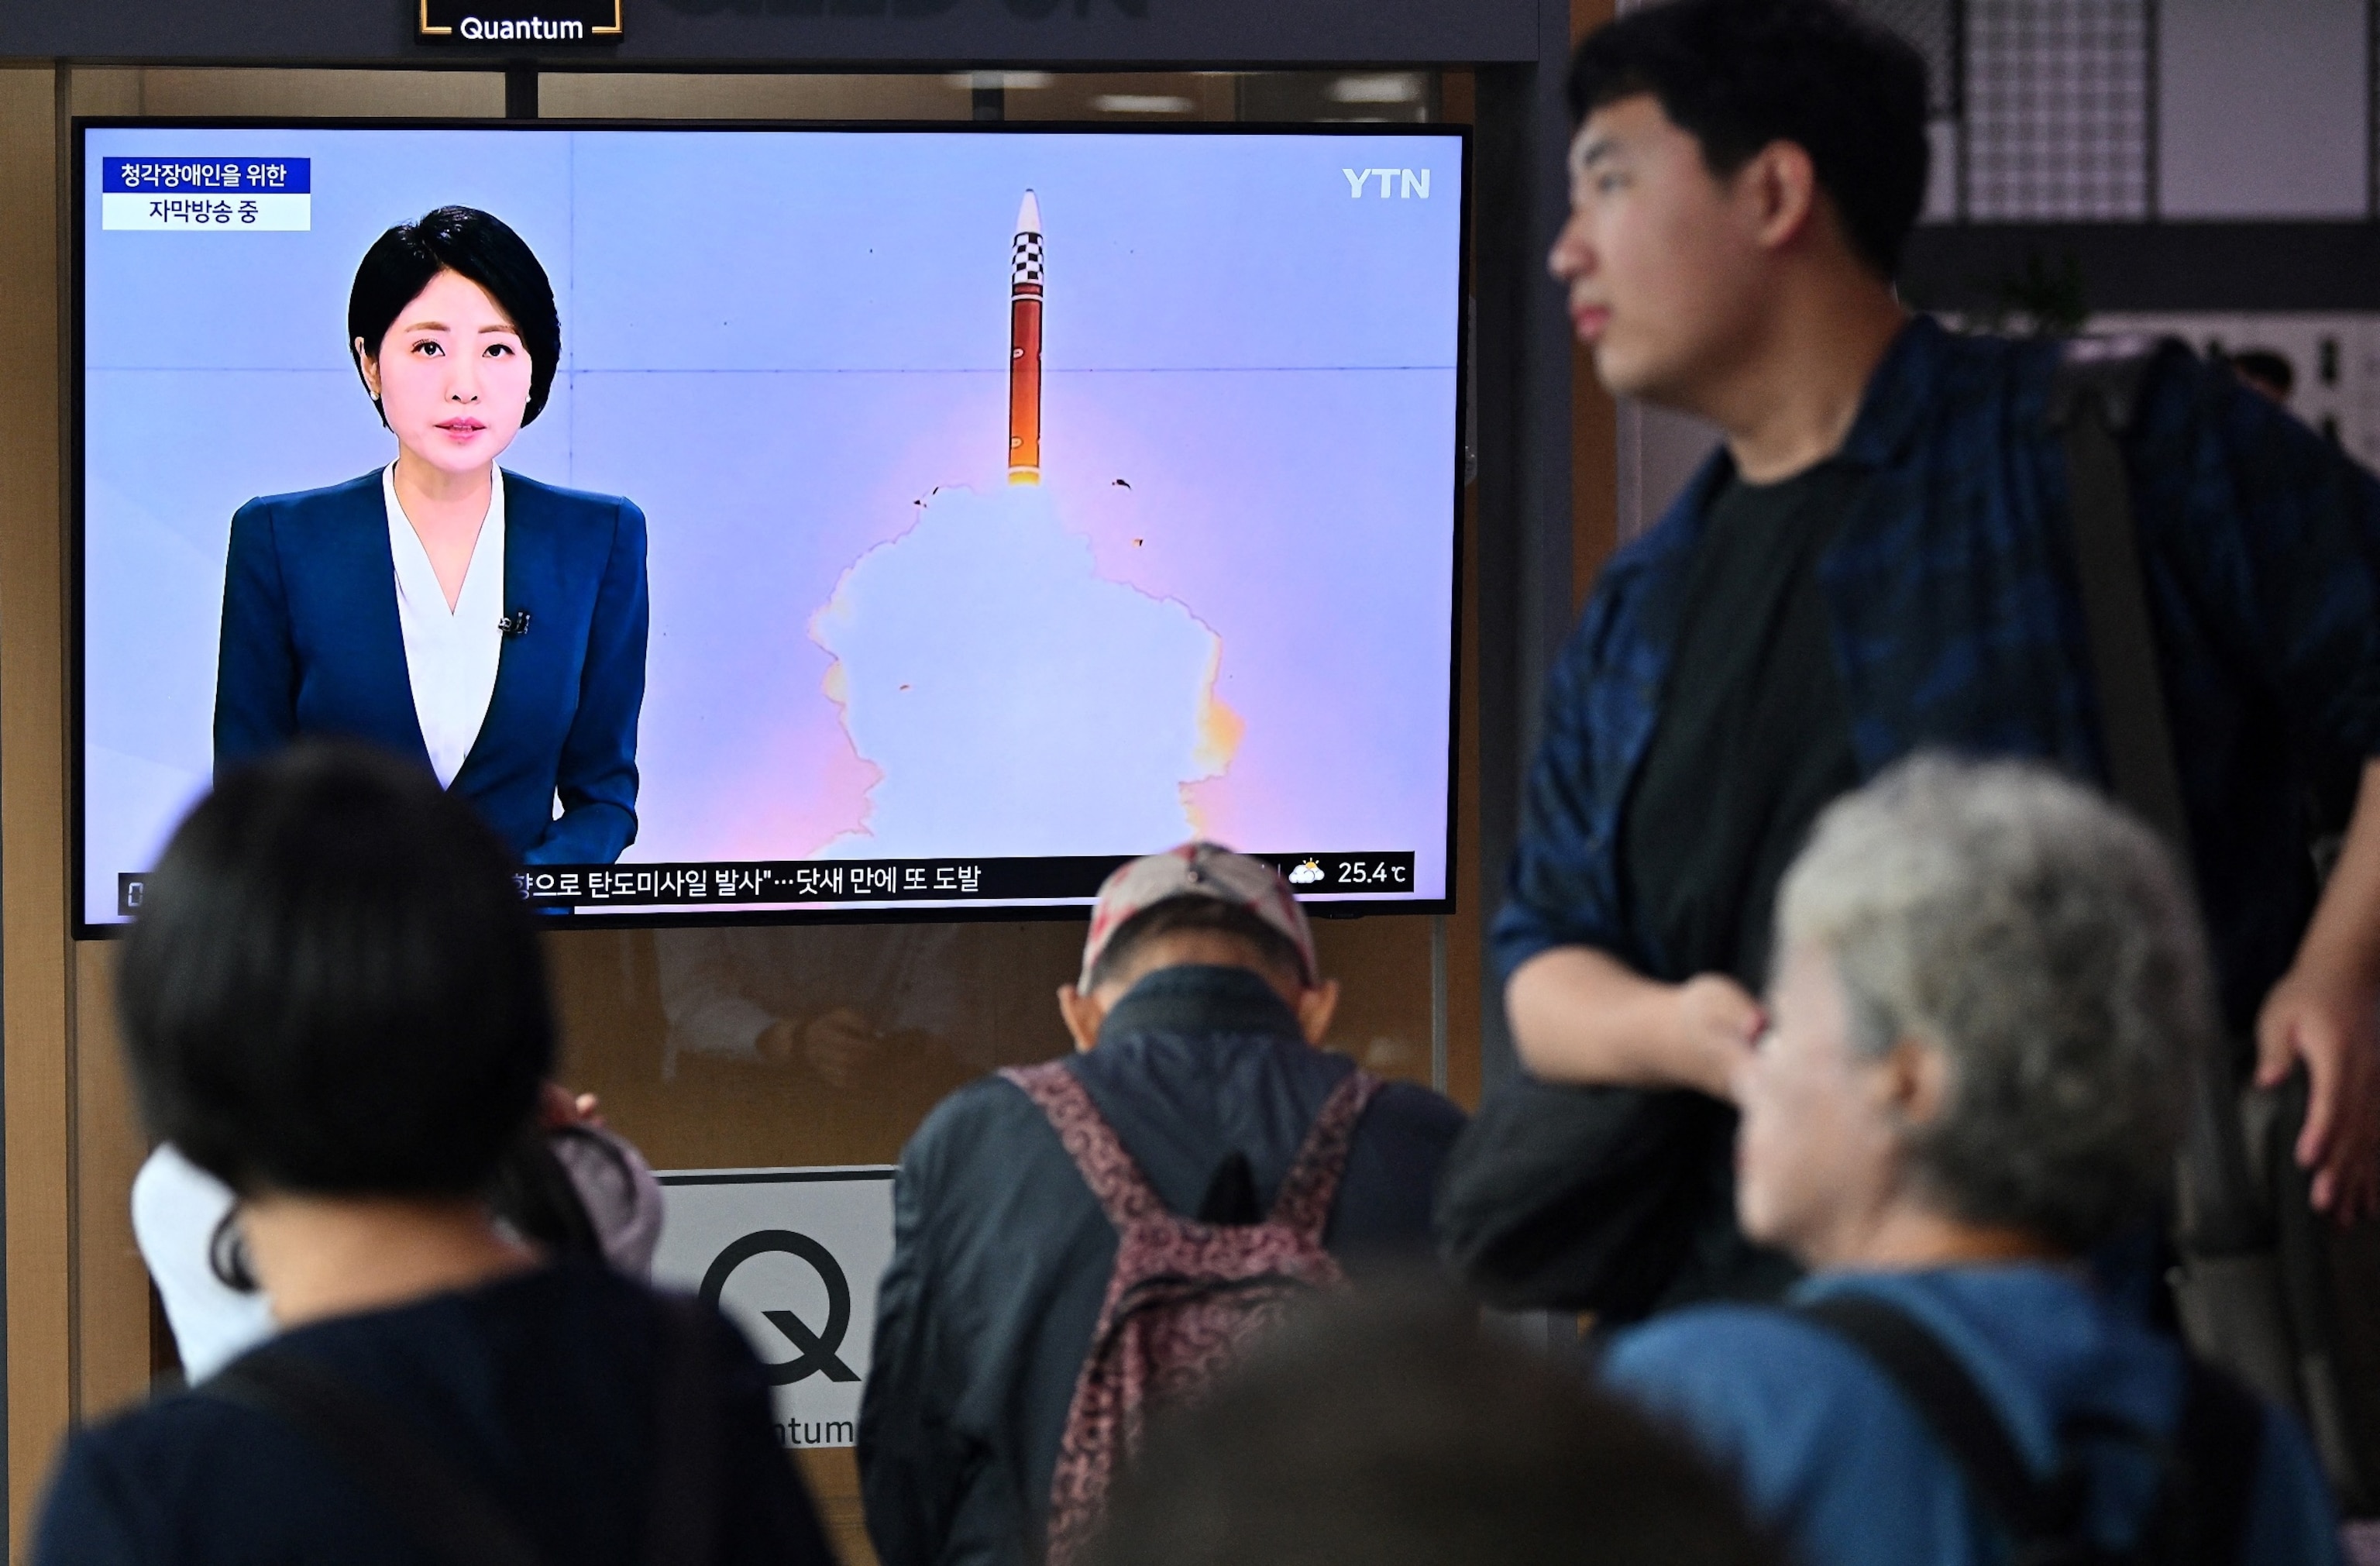 PHOTO: A man walks past a television screen showing a news broadcast with file footage of a North Korean missile test, at a train station in Seoul on July 1, 2024.